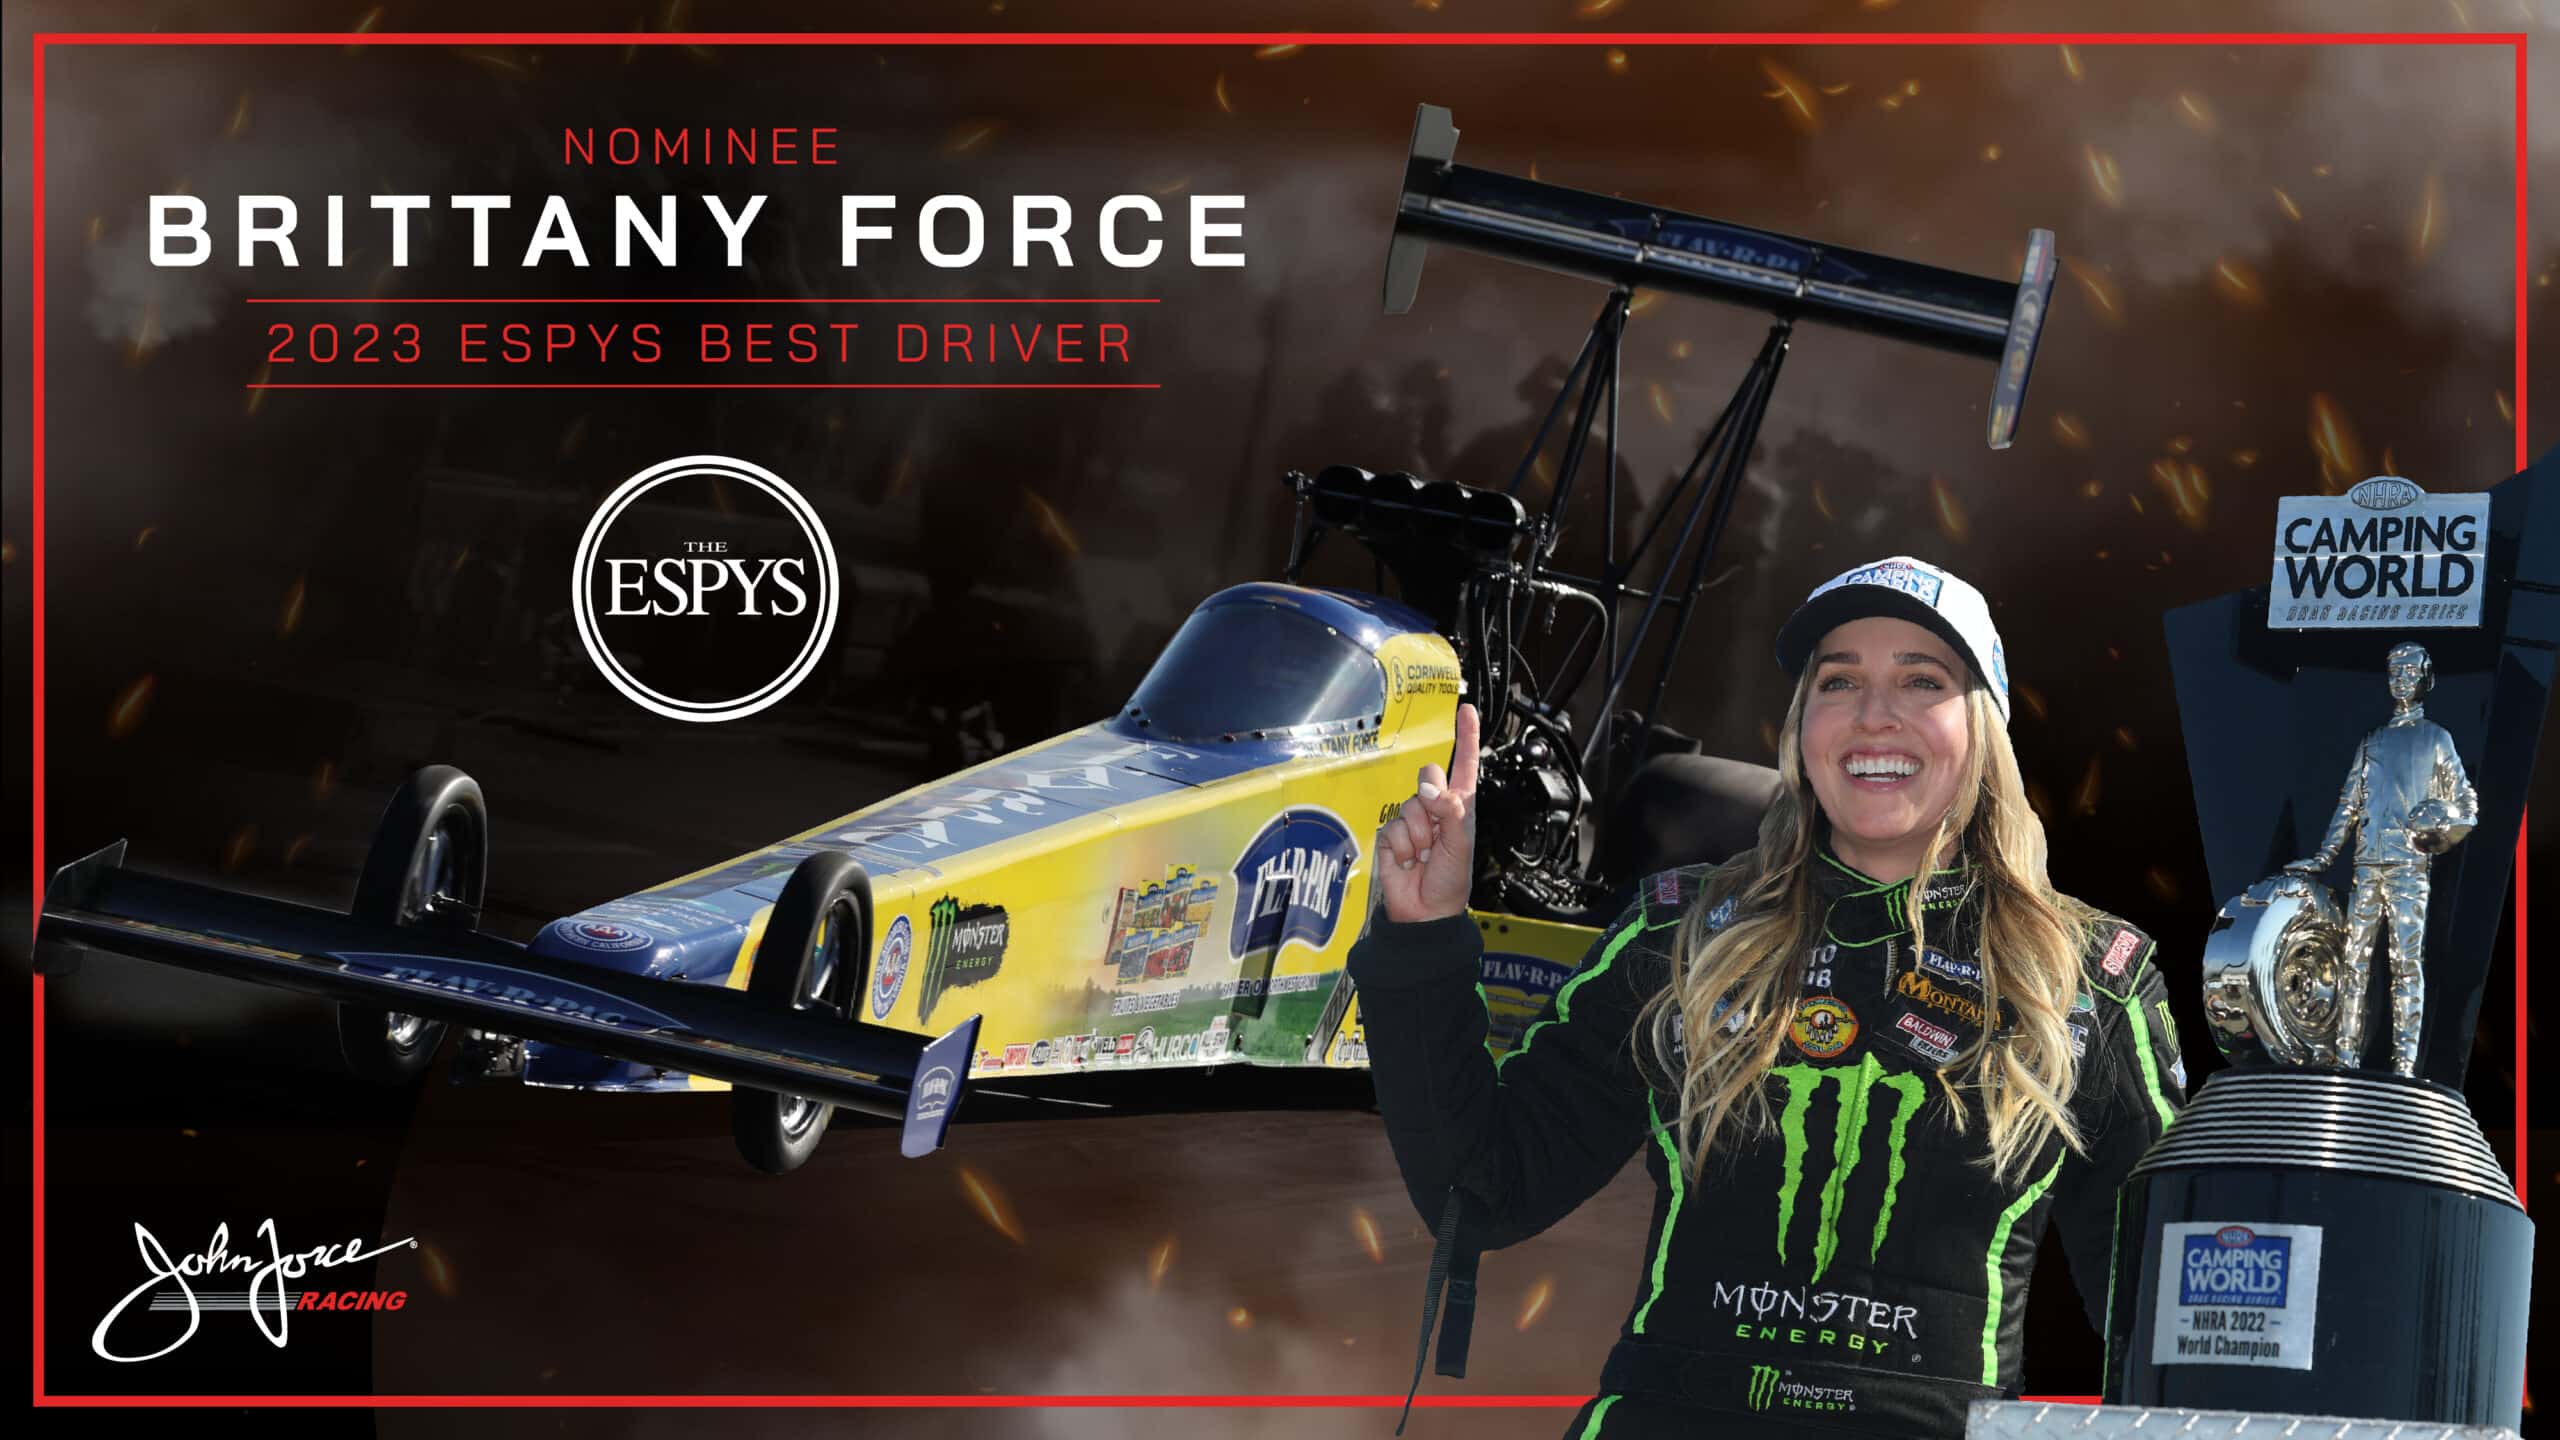 BRITTANY FORCE NOMINATED FOR ESPYS BEST DRIVER AWARD John Force Racing